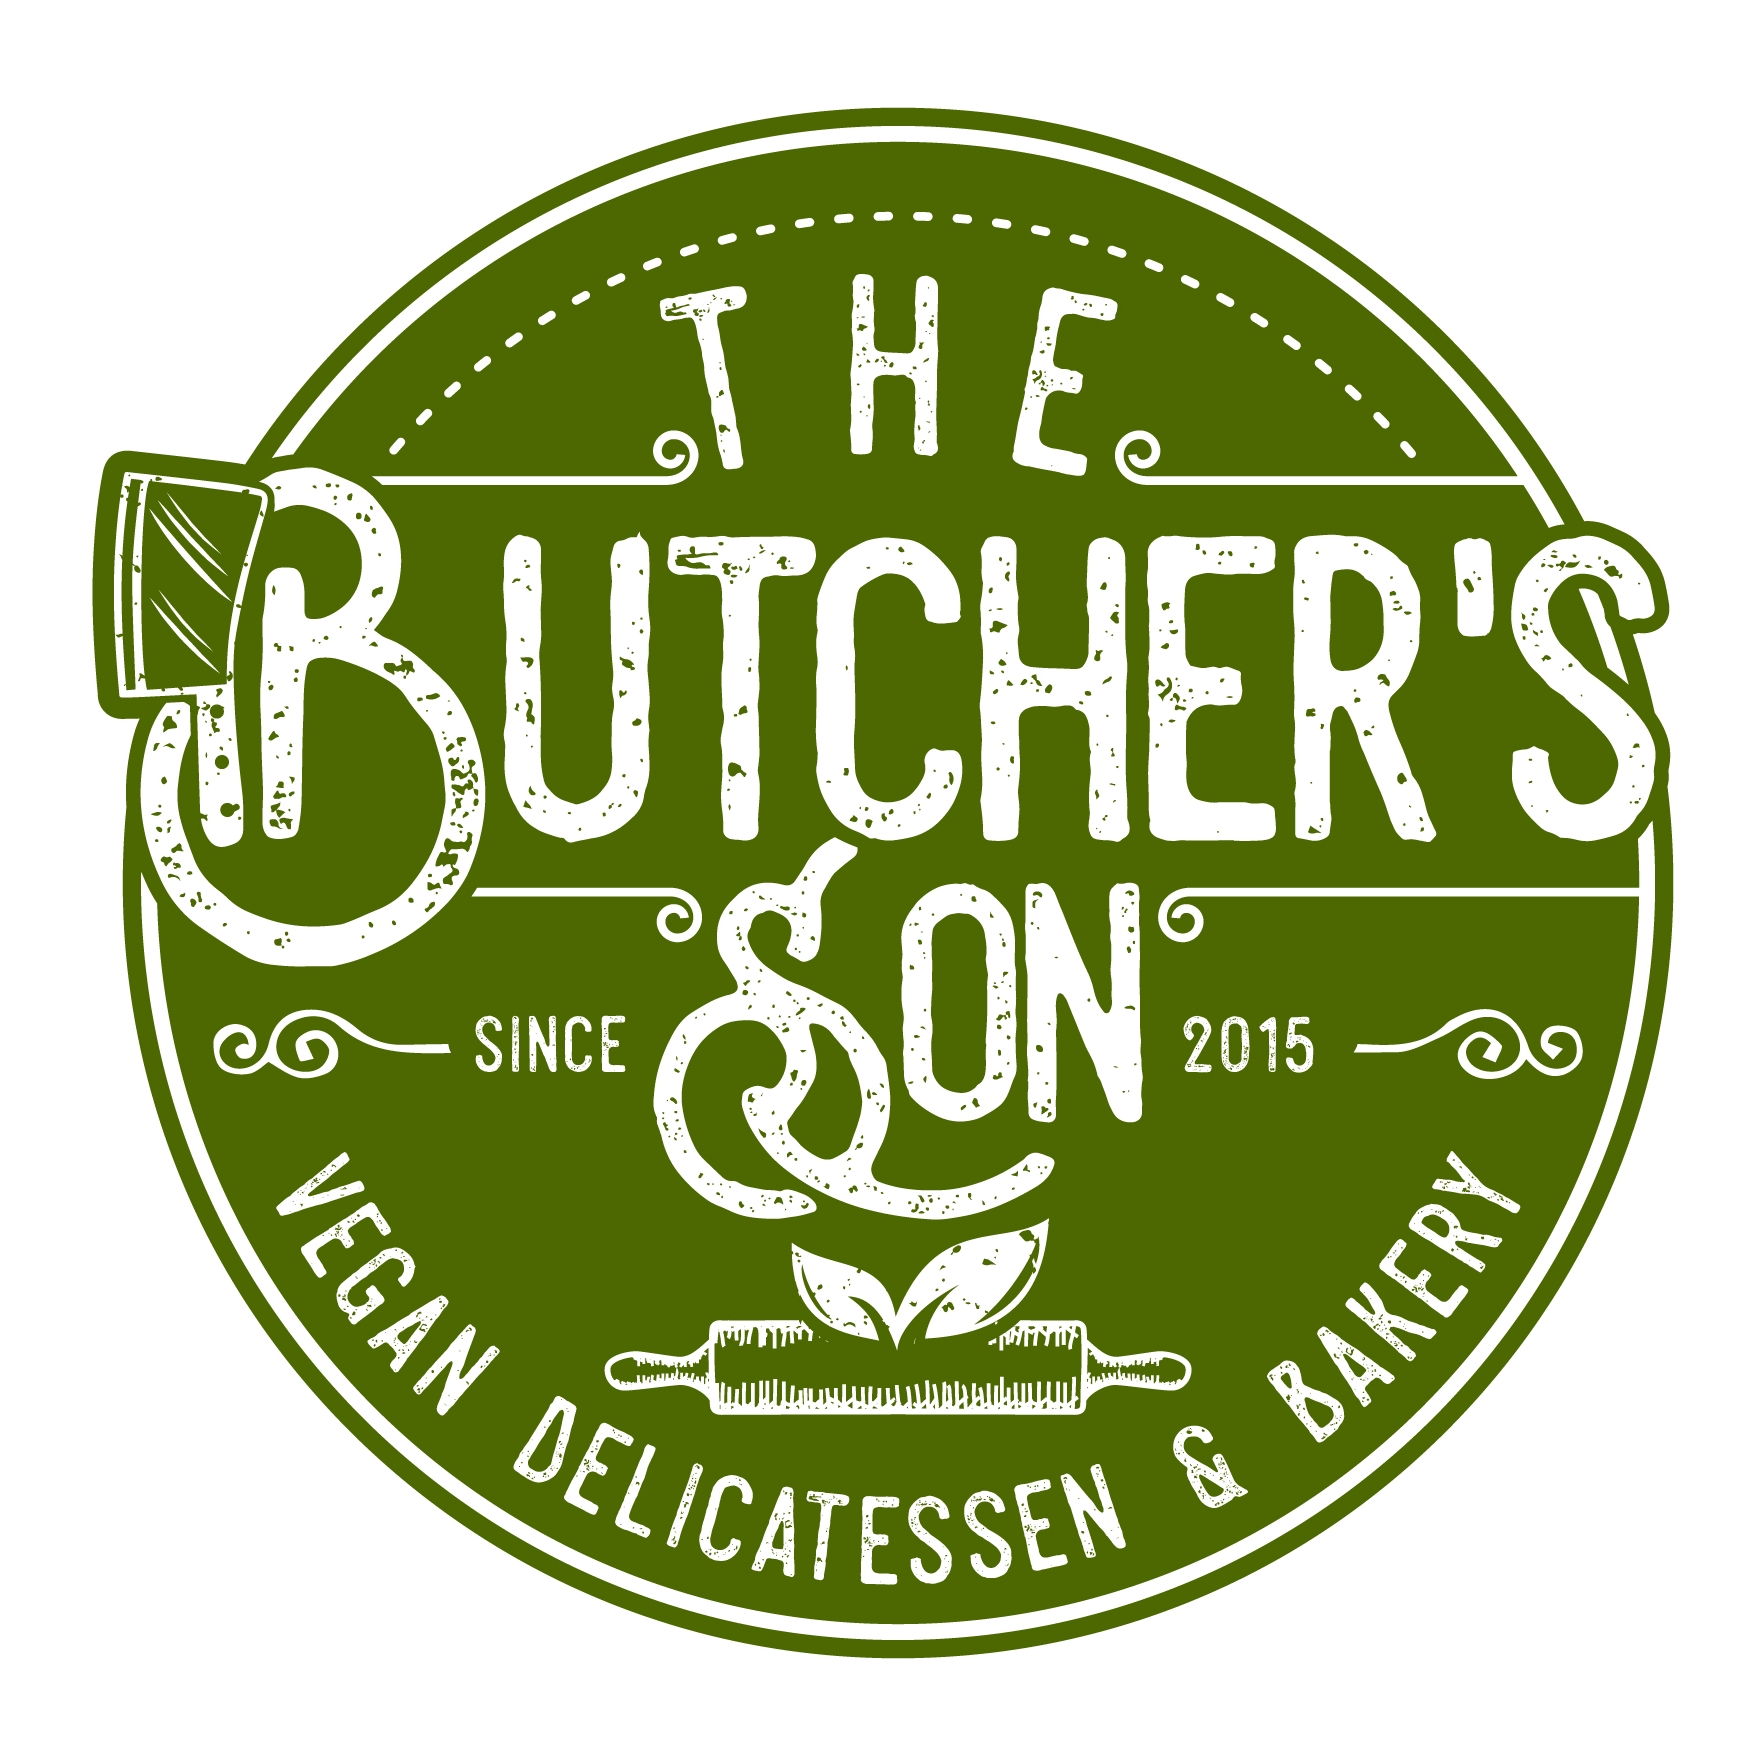 The Butcher’s Son